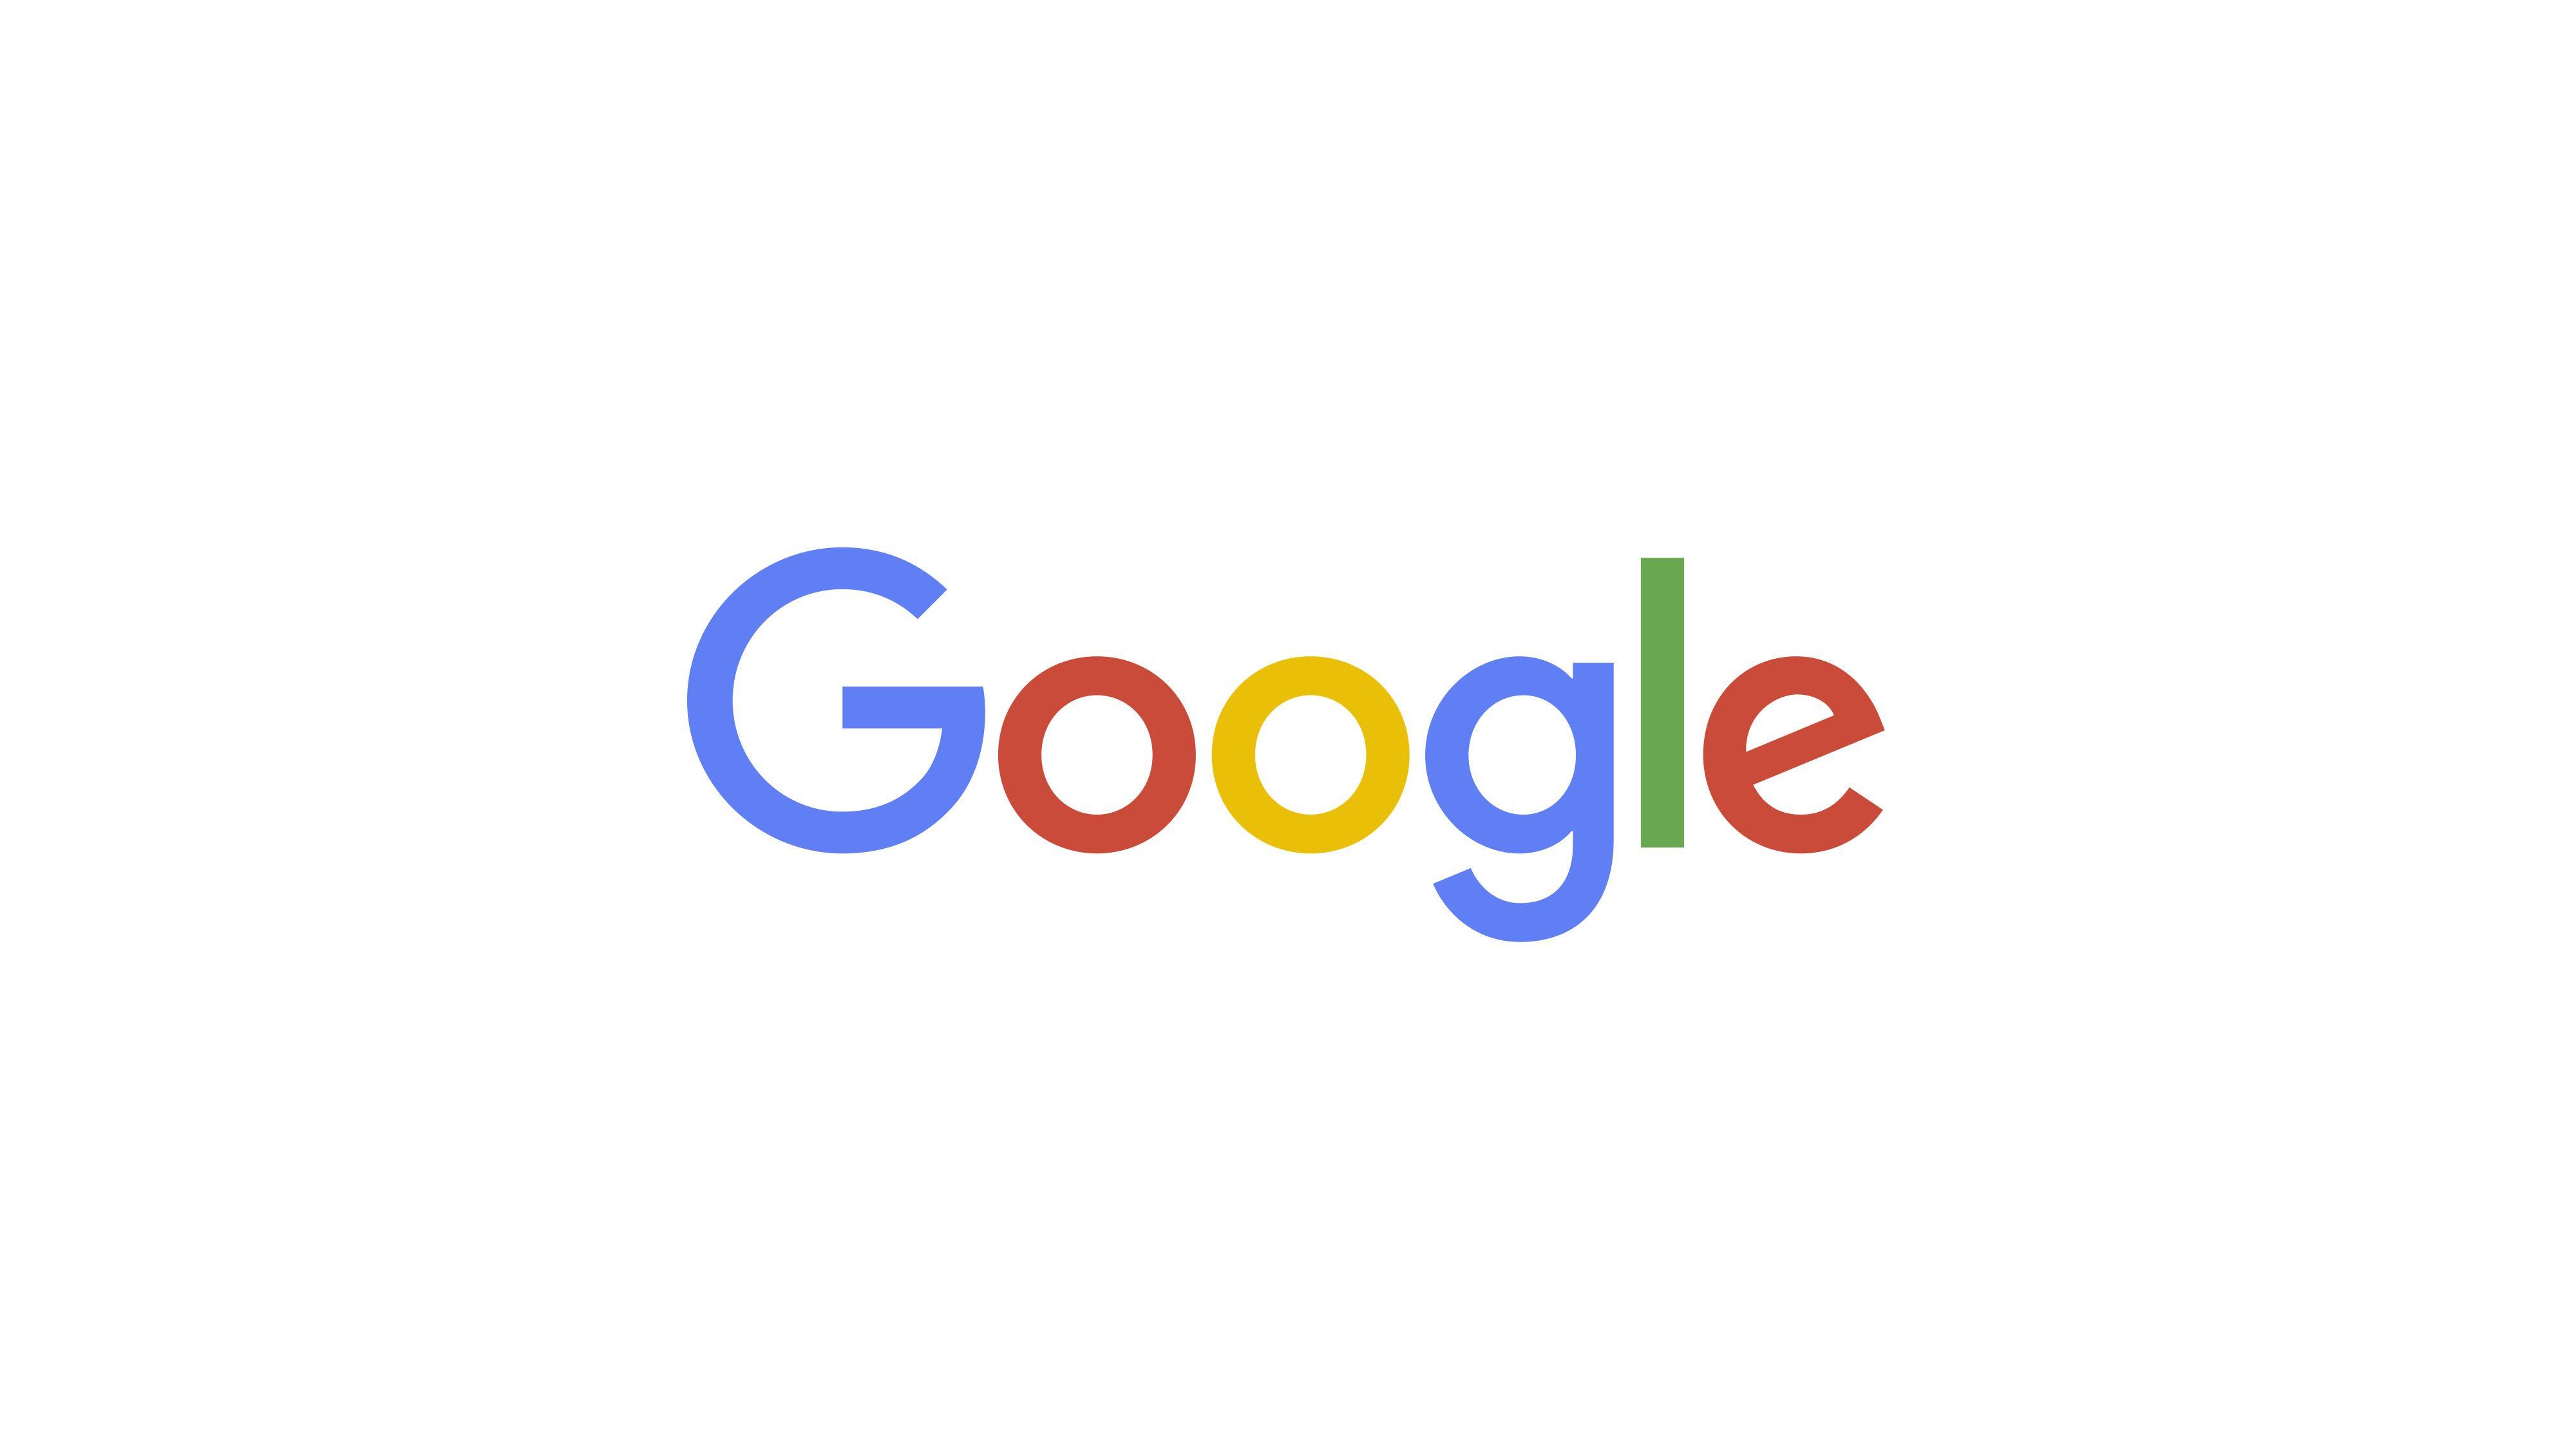 Google Chrome New Logo - Love It or Hate It? Google's Redesigned Logo | Digital - Ad Age